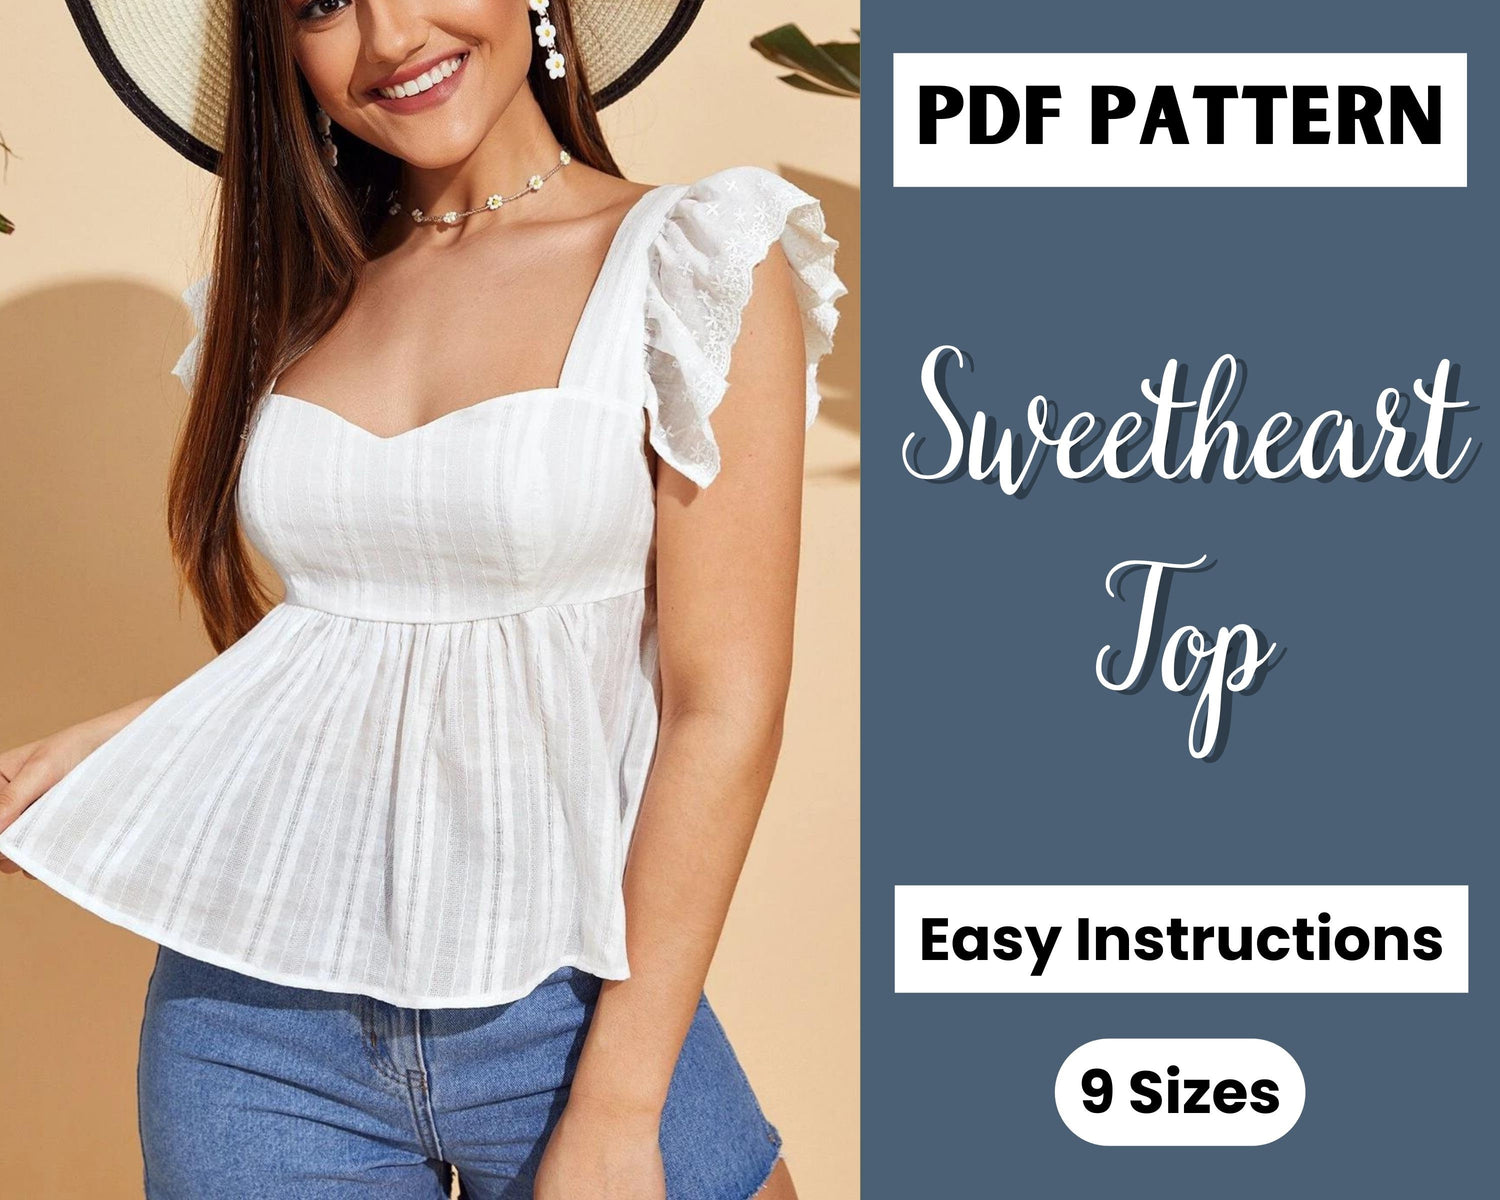 Gathered Smock Top Sewing Pattern | Trendy Sewing Pattern Top | Summer Tops Sewing Pattern | Sweetheart Top Sewing Pattern | Ruffle Sleeve